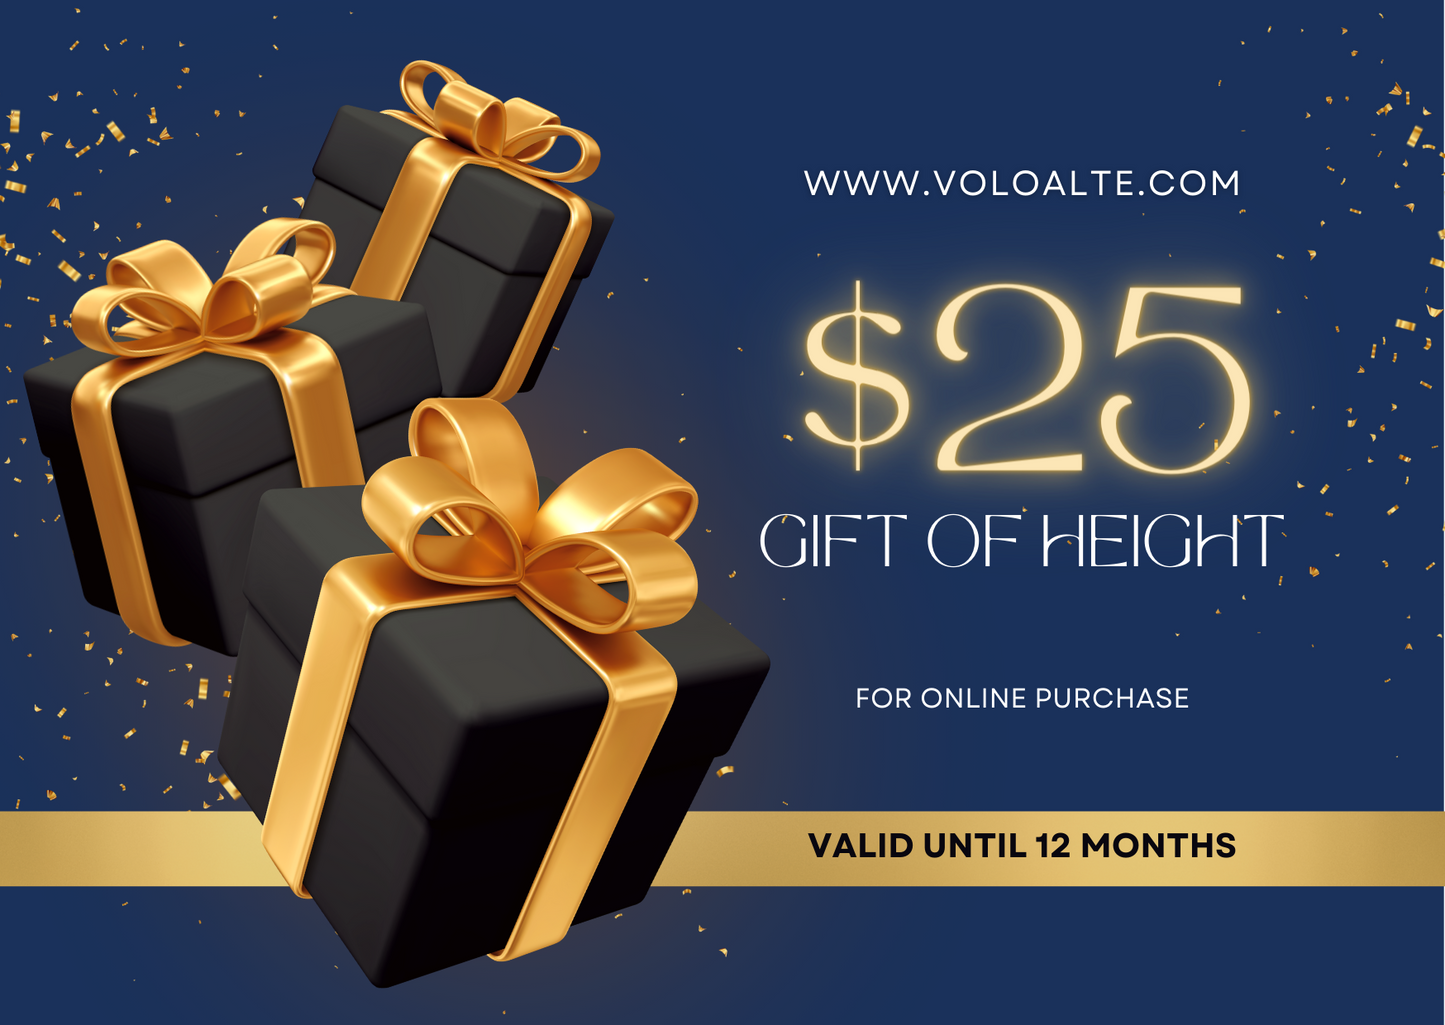 Volo Alte Shoes - Gift Card